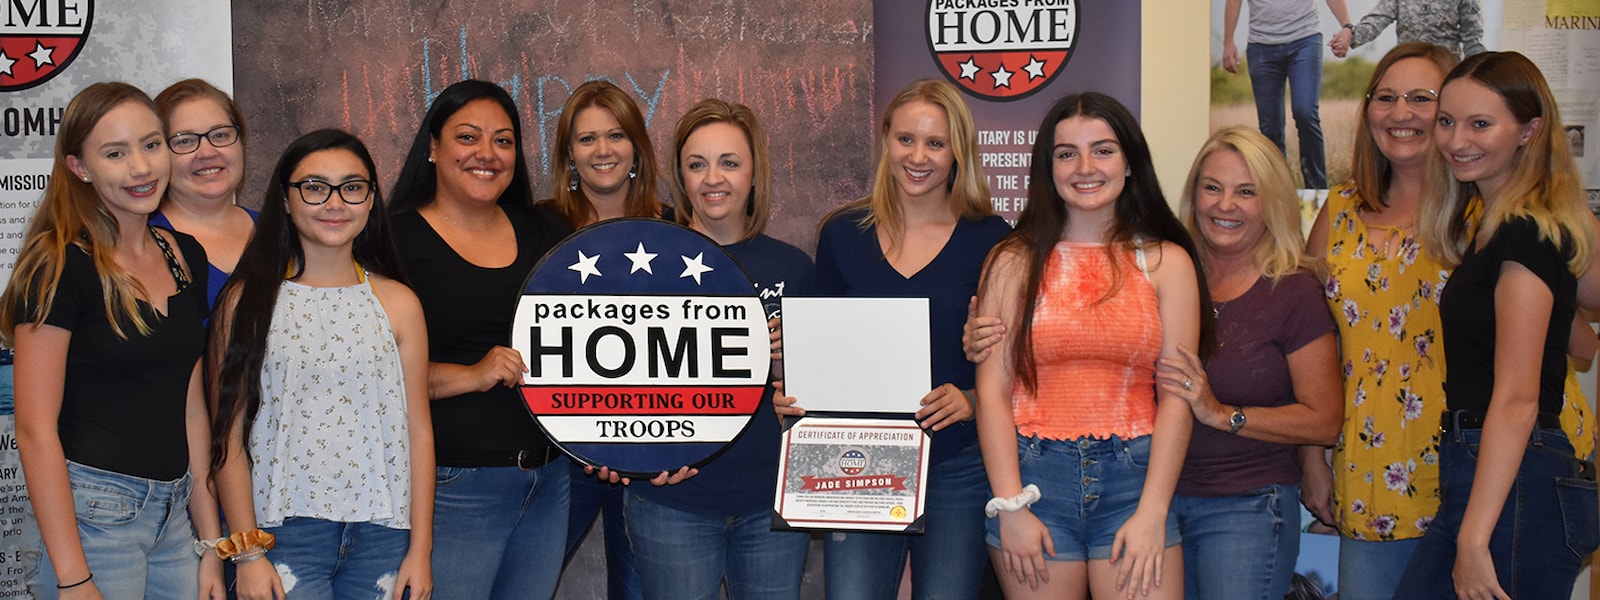 students and teachers who participated in packages from home pose for a picture.